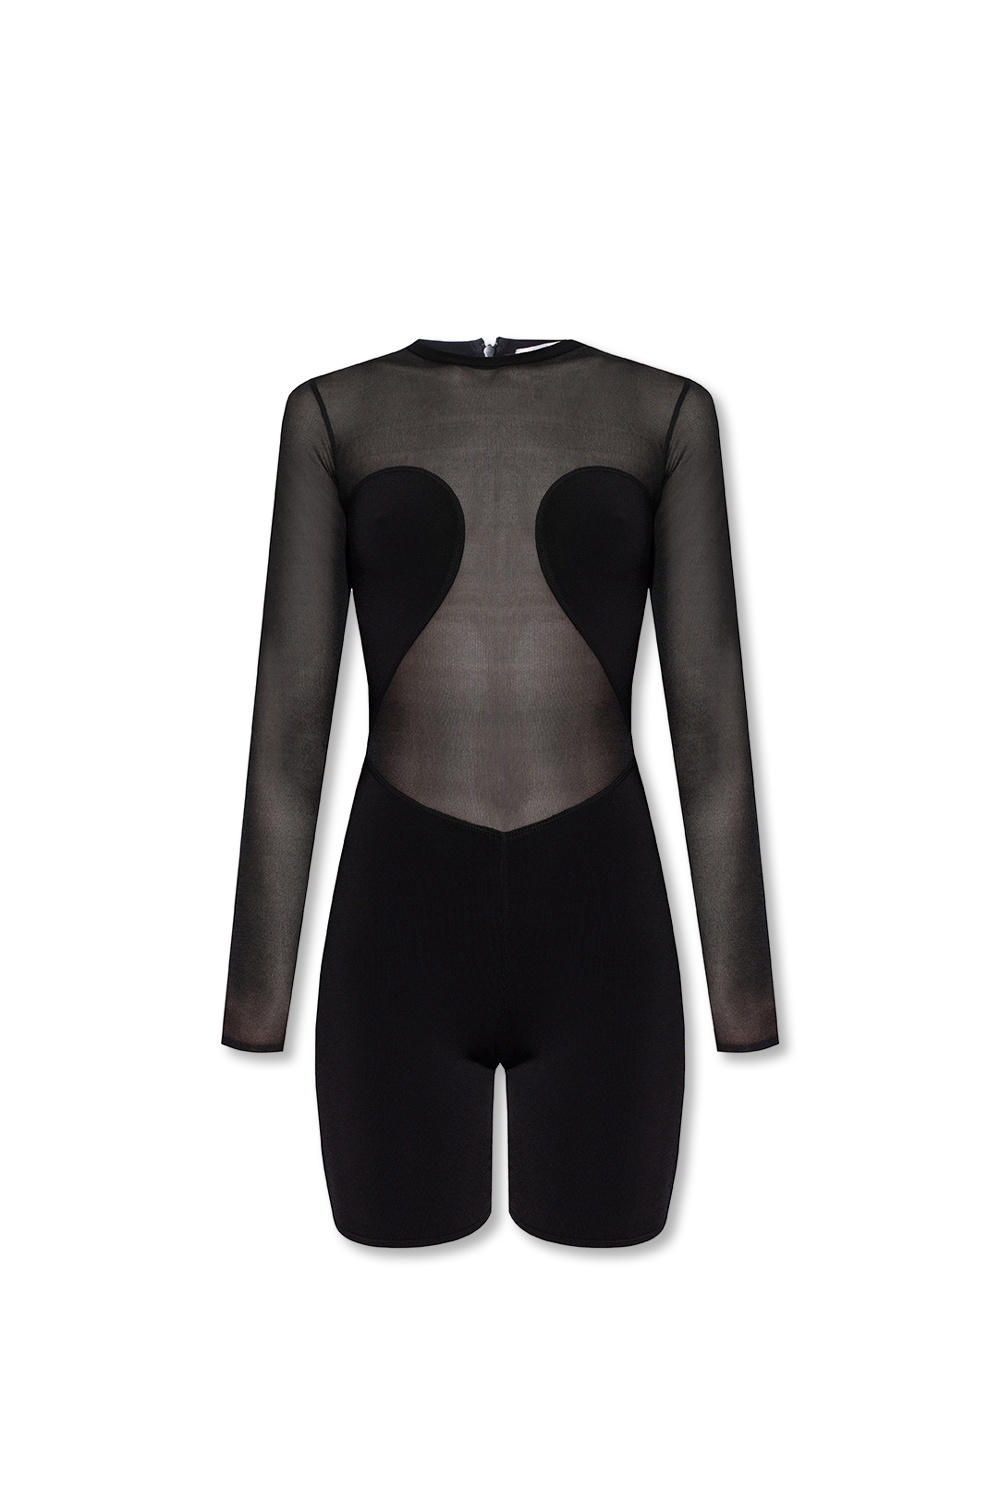 Alaia Bodysuit with sheer inserts